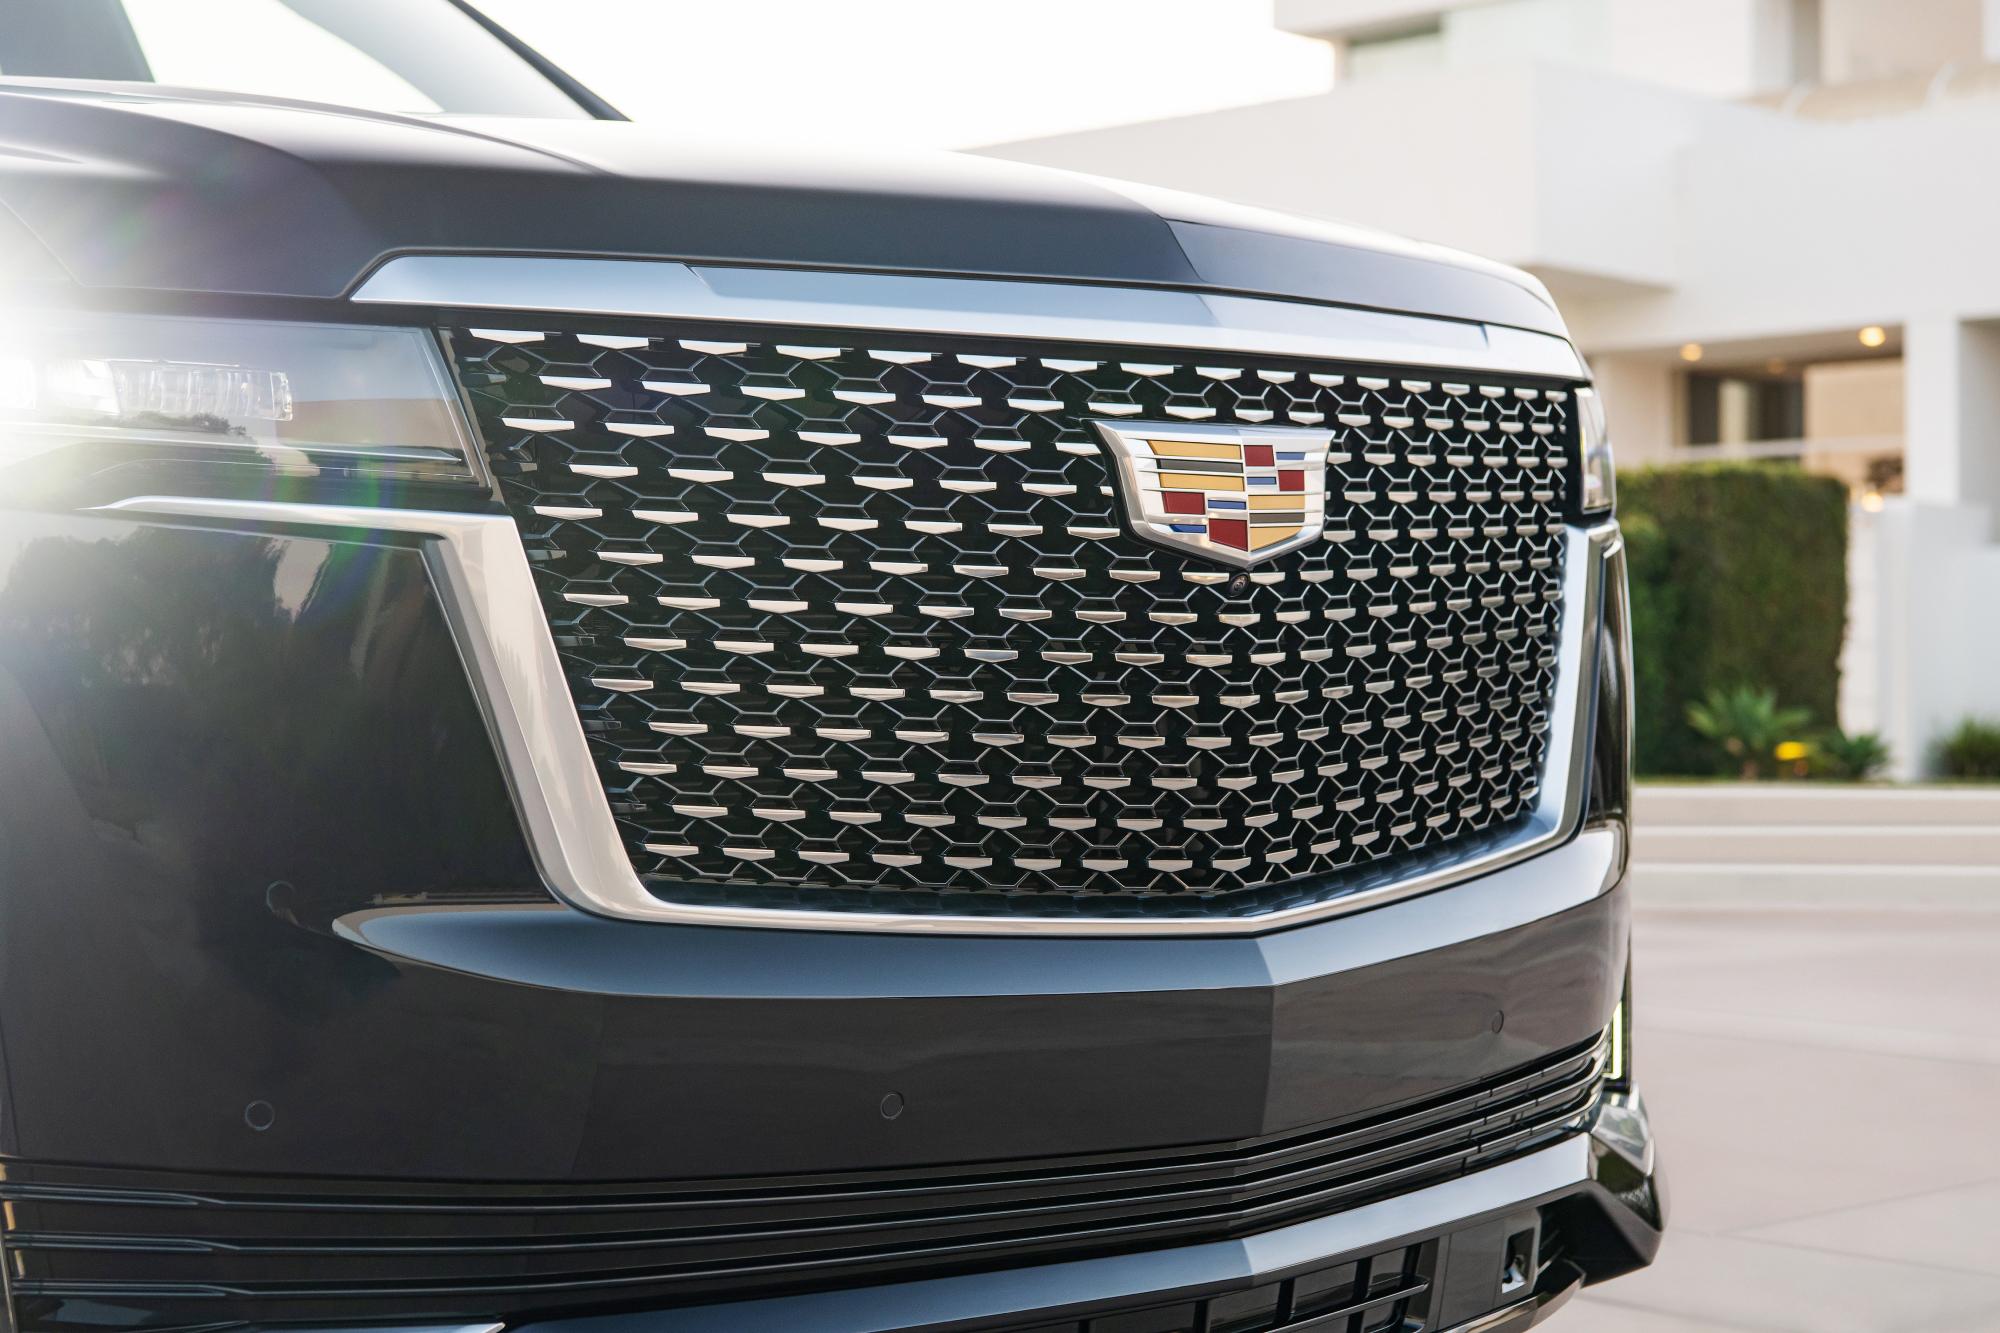 The Cadillac Escalade is a mainstay in the luxury full-size SUV class.